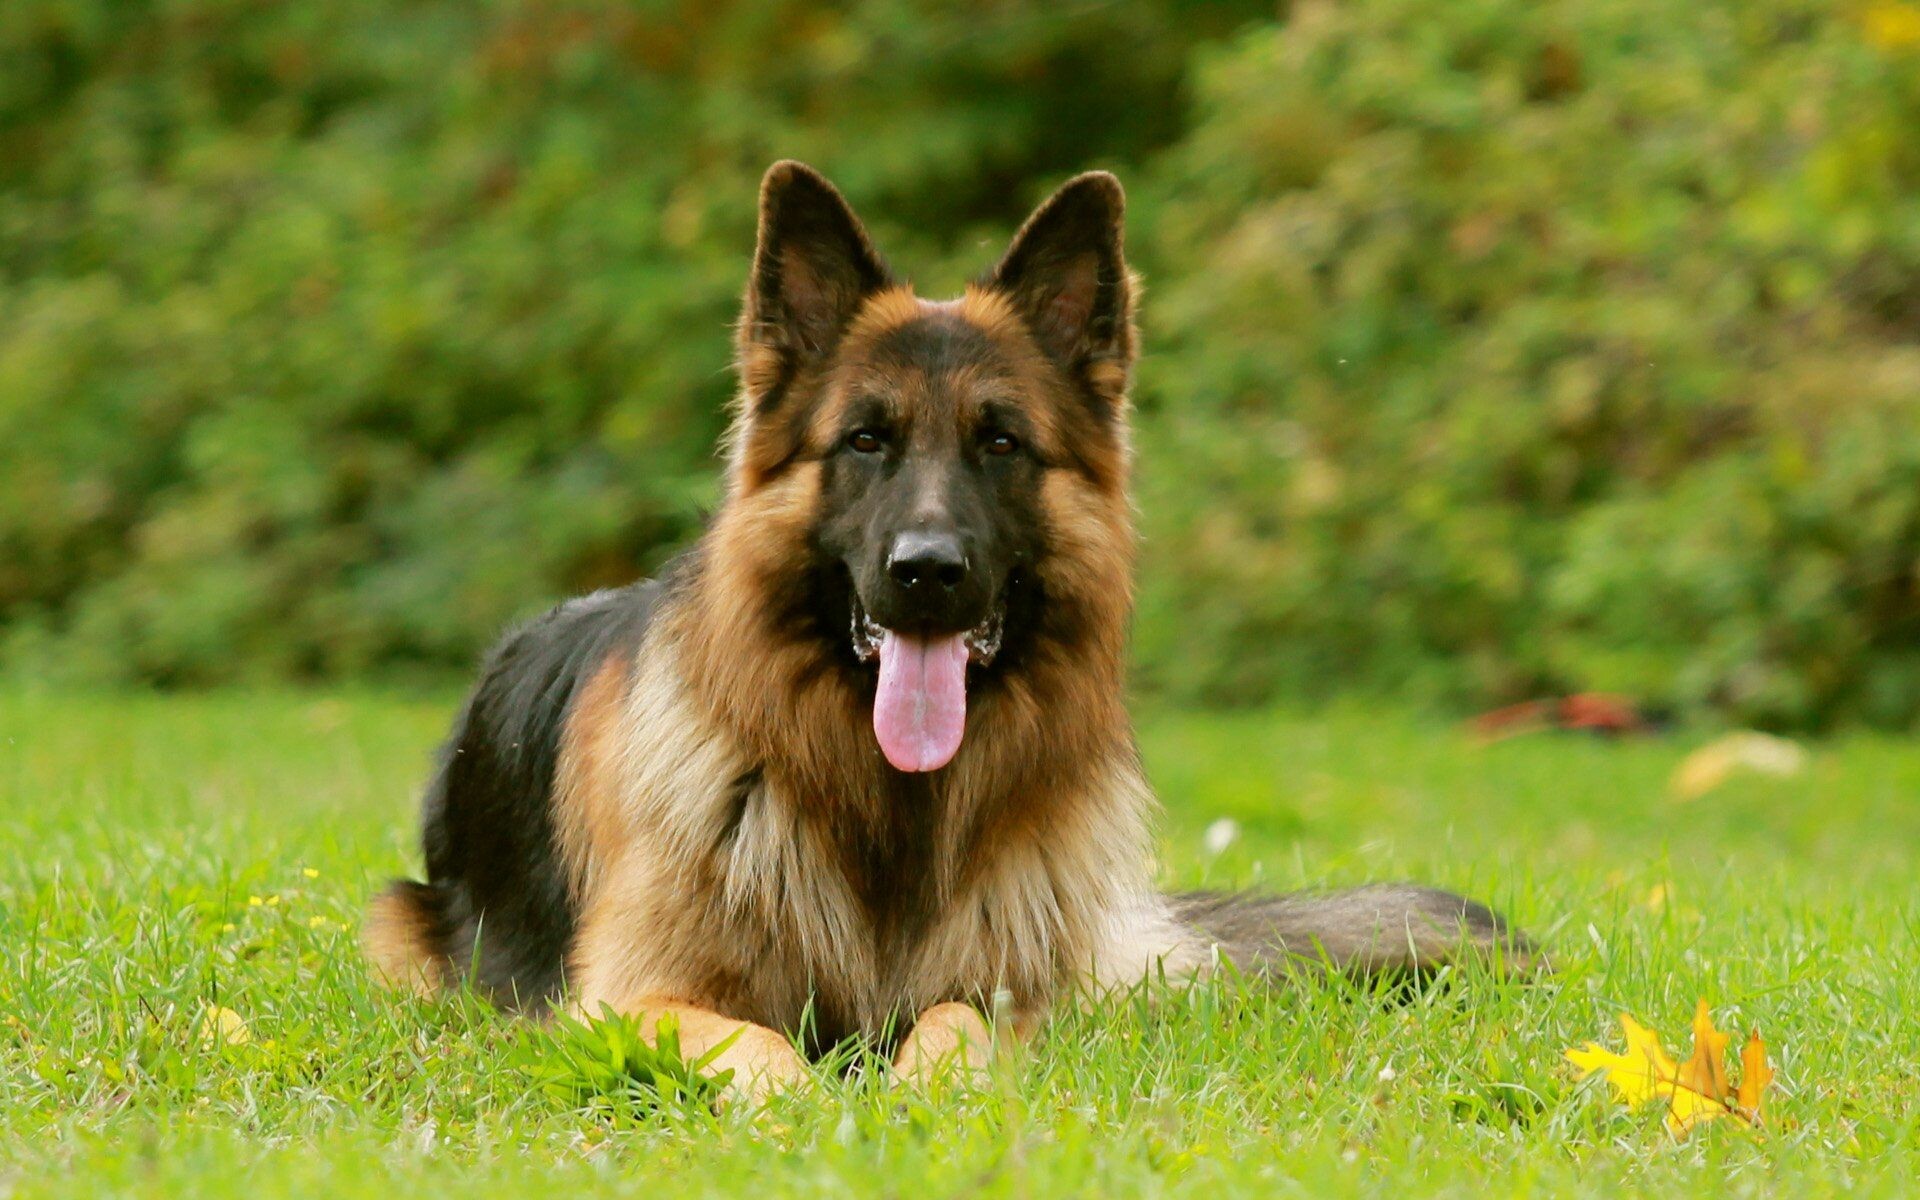 German Shepherd: Females are from 55 to 60 cm tall at the shoulder and weigh between 25 and 32 kg. 1920x1200 HD Wallpaper.